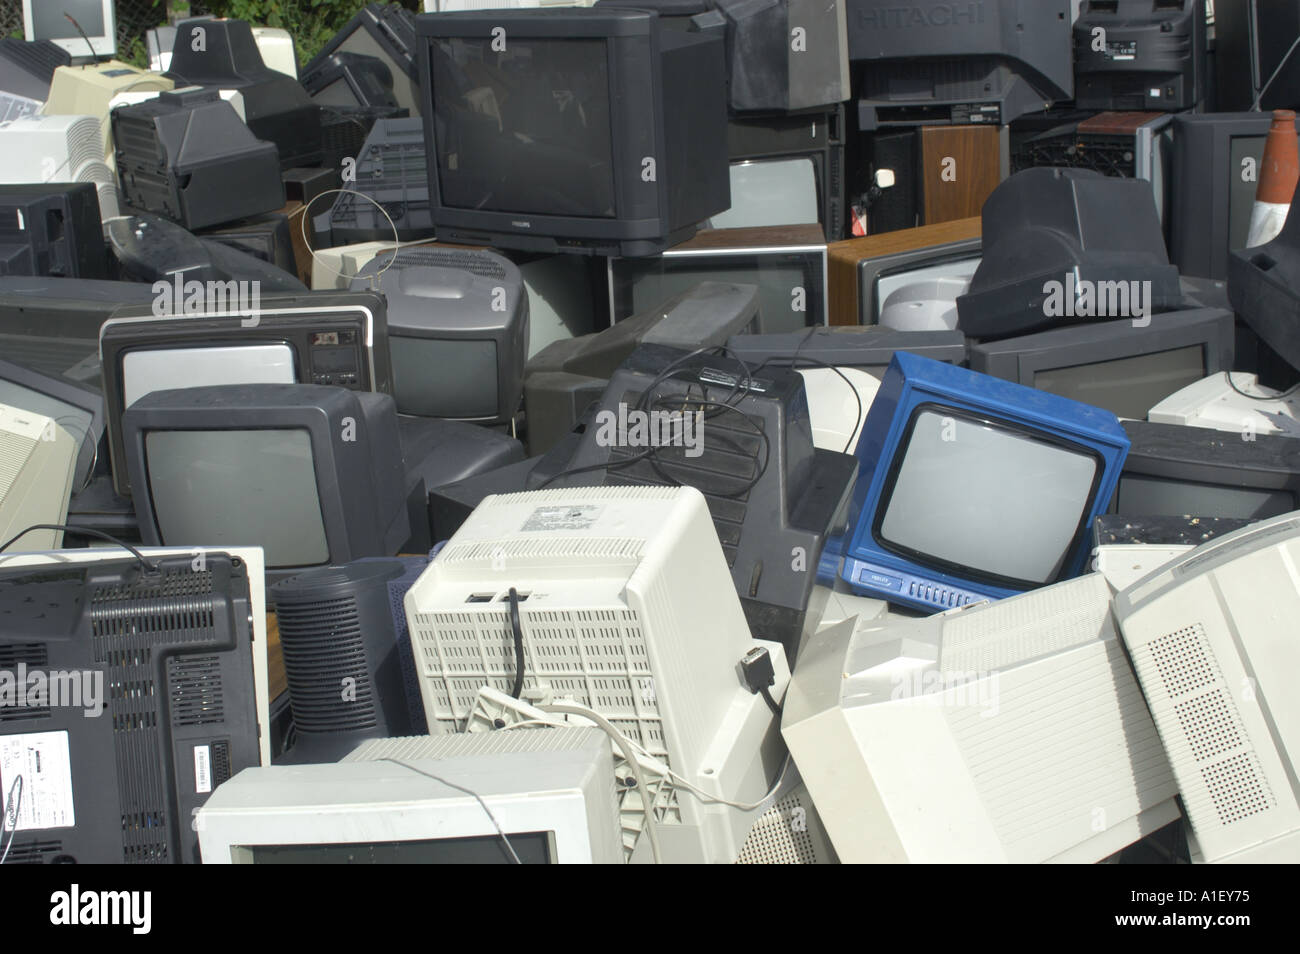 Scrapped Televisions and computer monitors at a recycling centre in Dorset England. Stock Photo